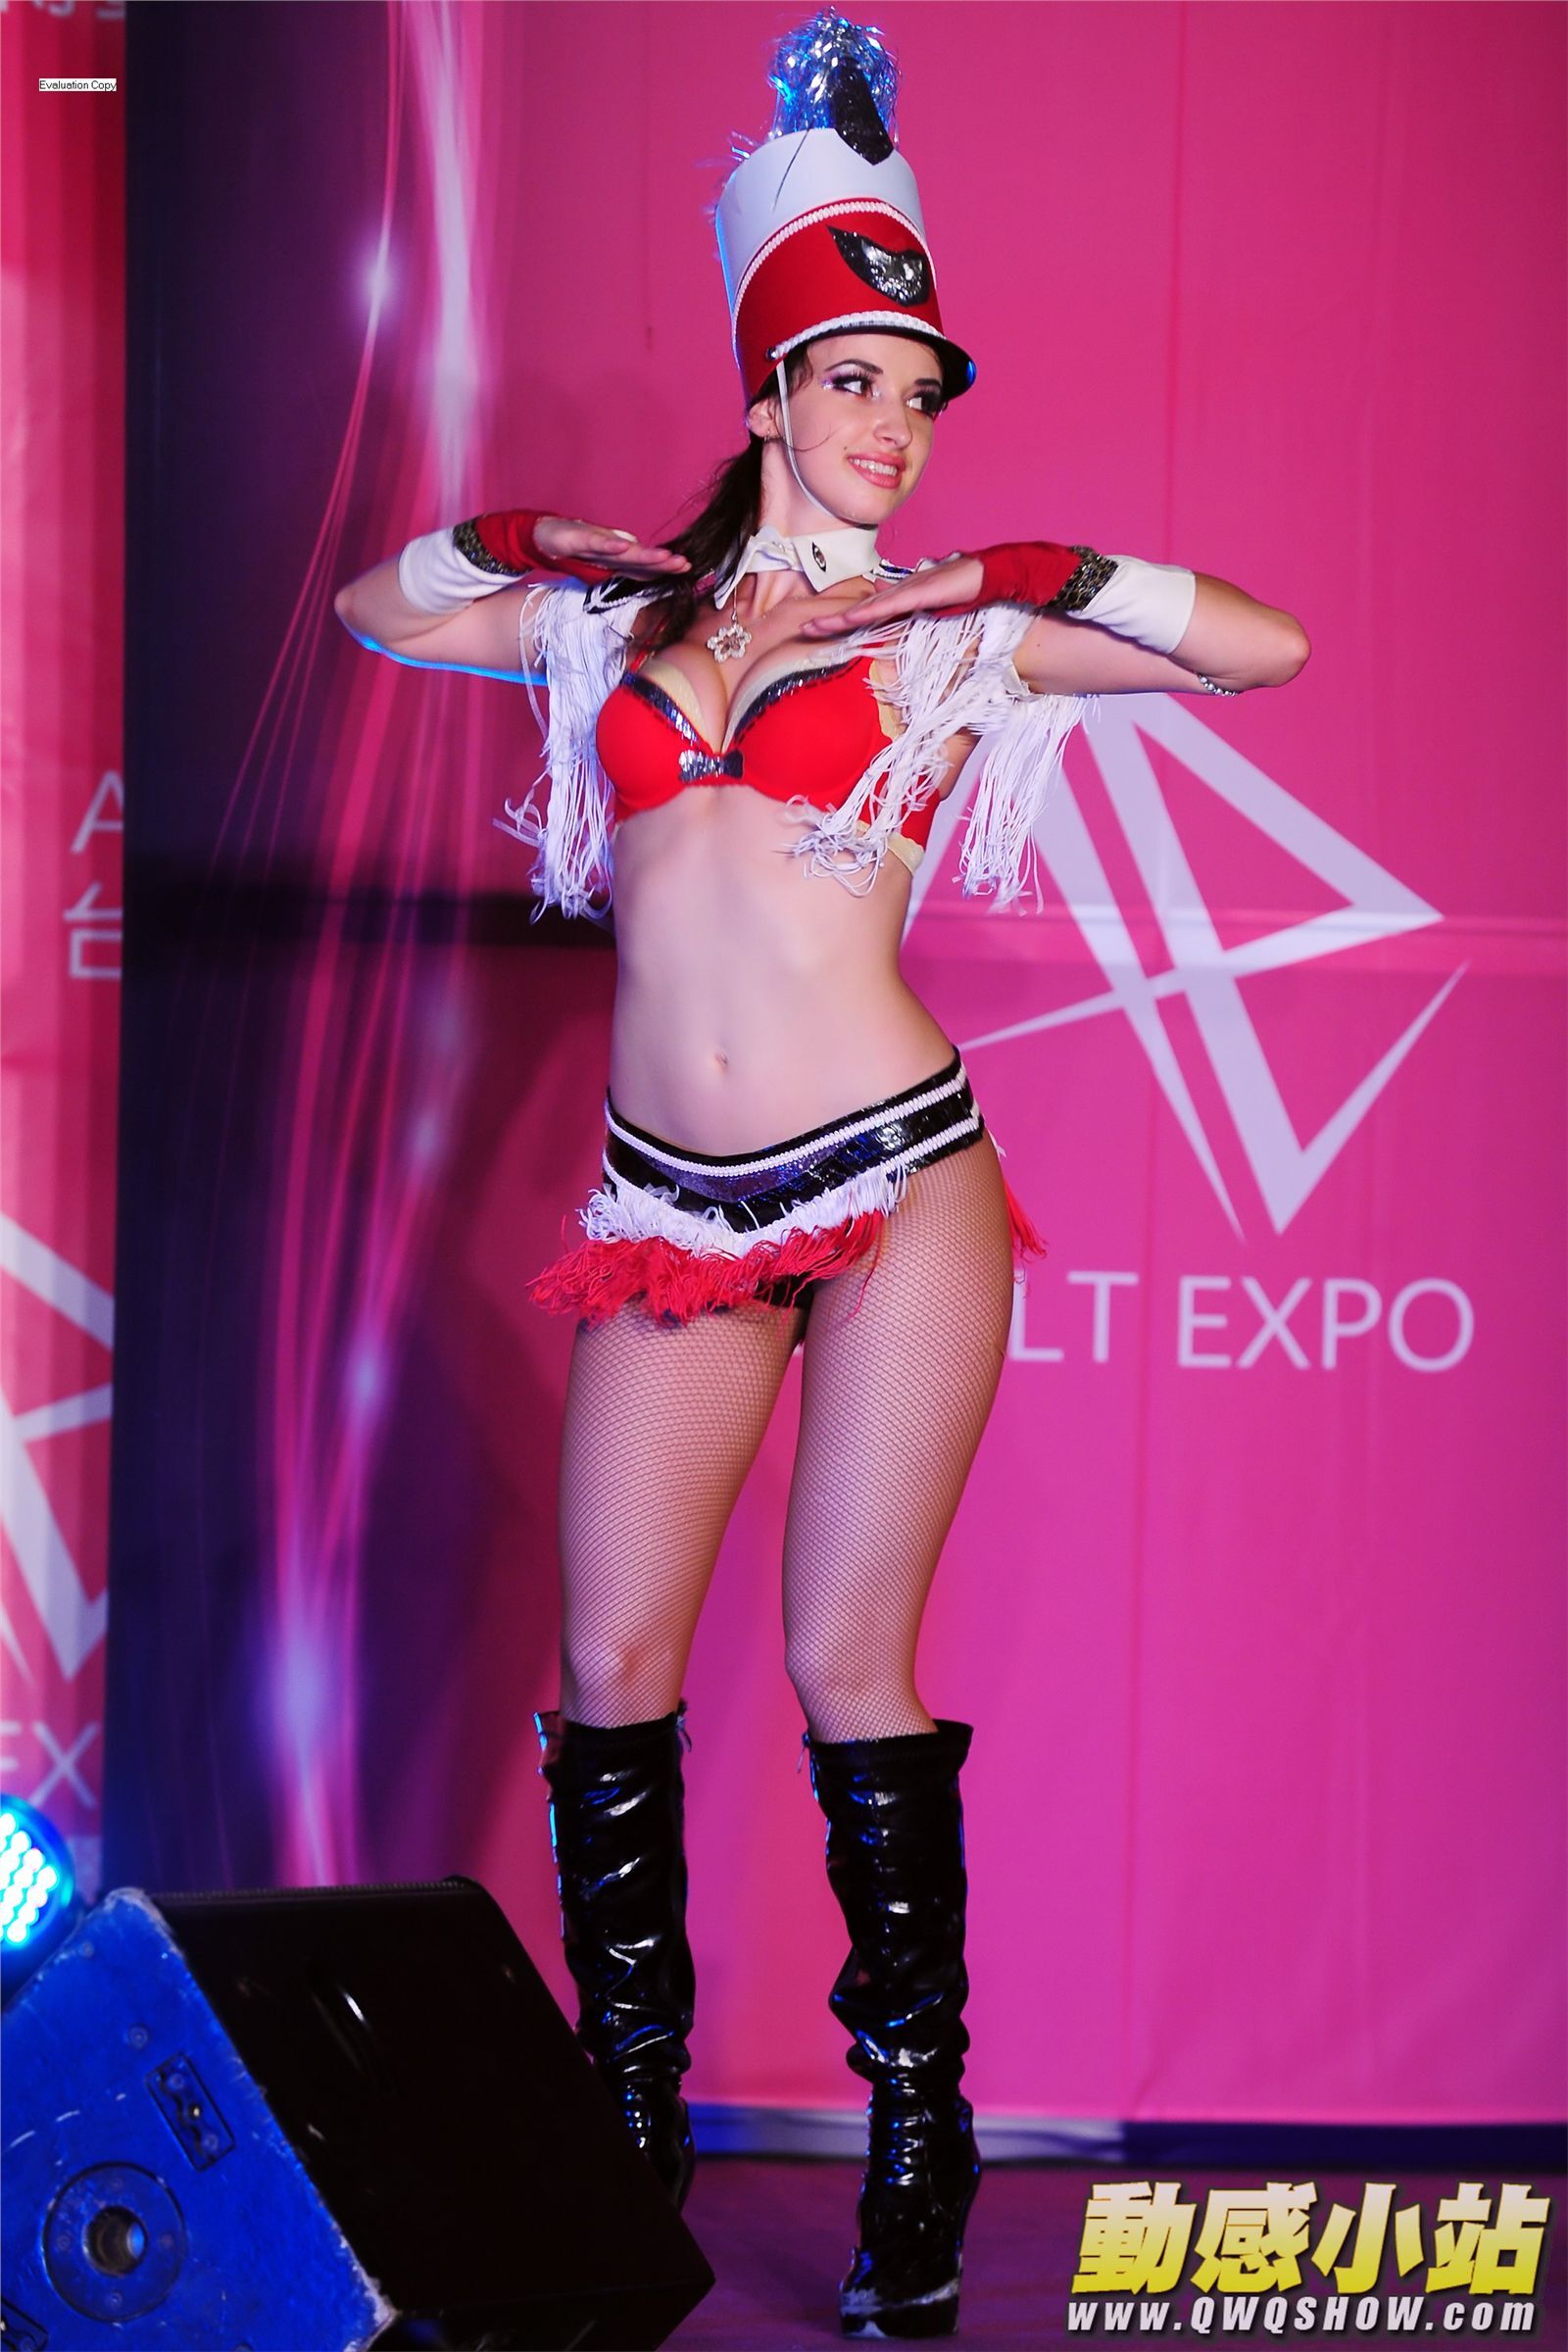 2012 Taiwan Adult Expo foreign dancers sexy whip show fashion dance show